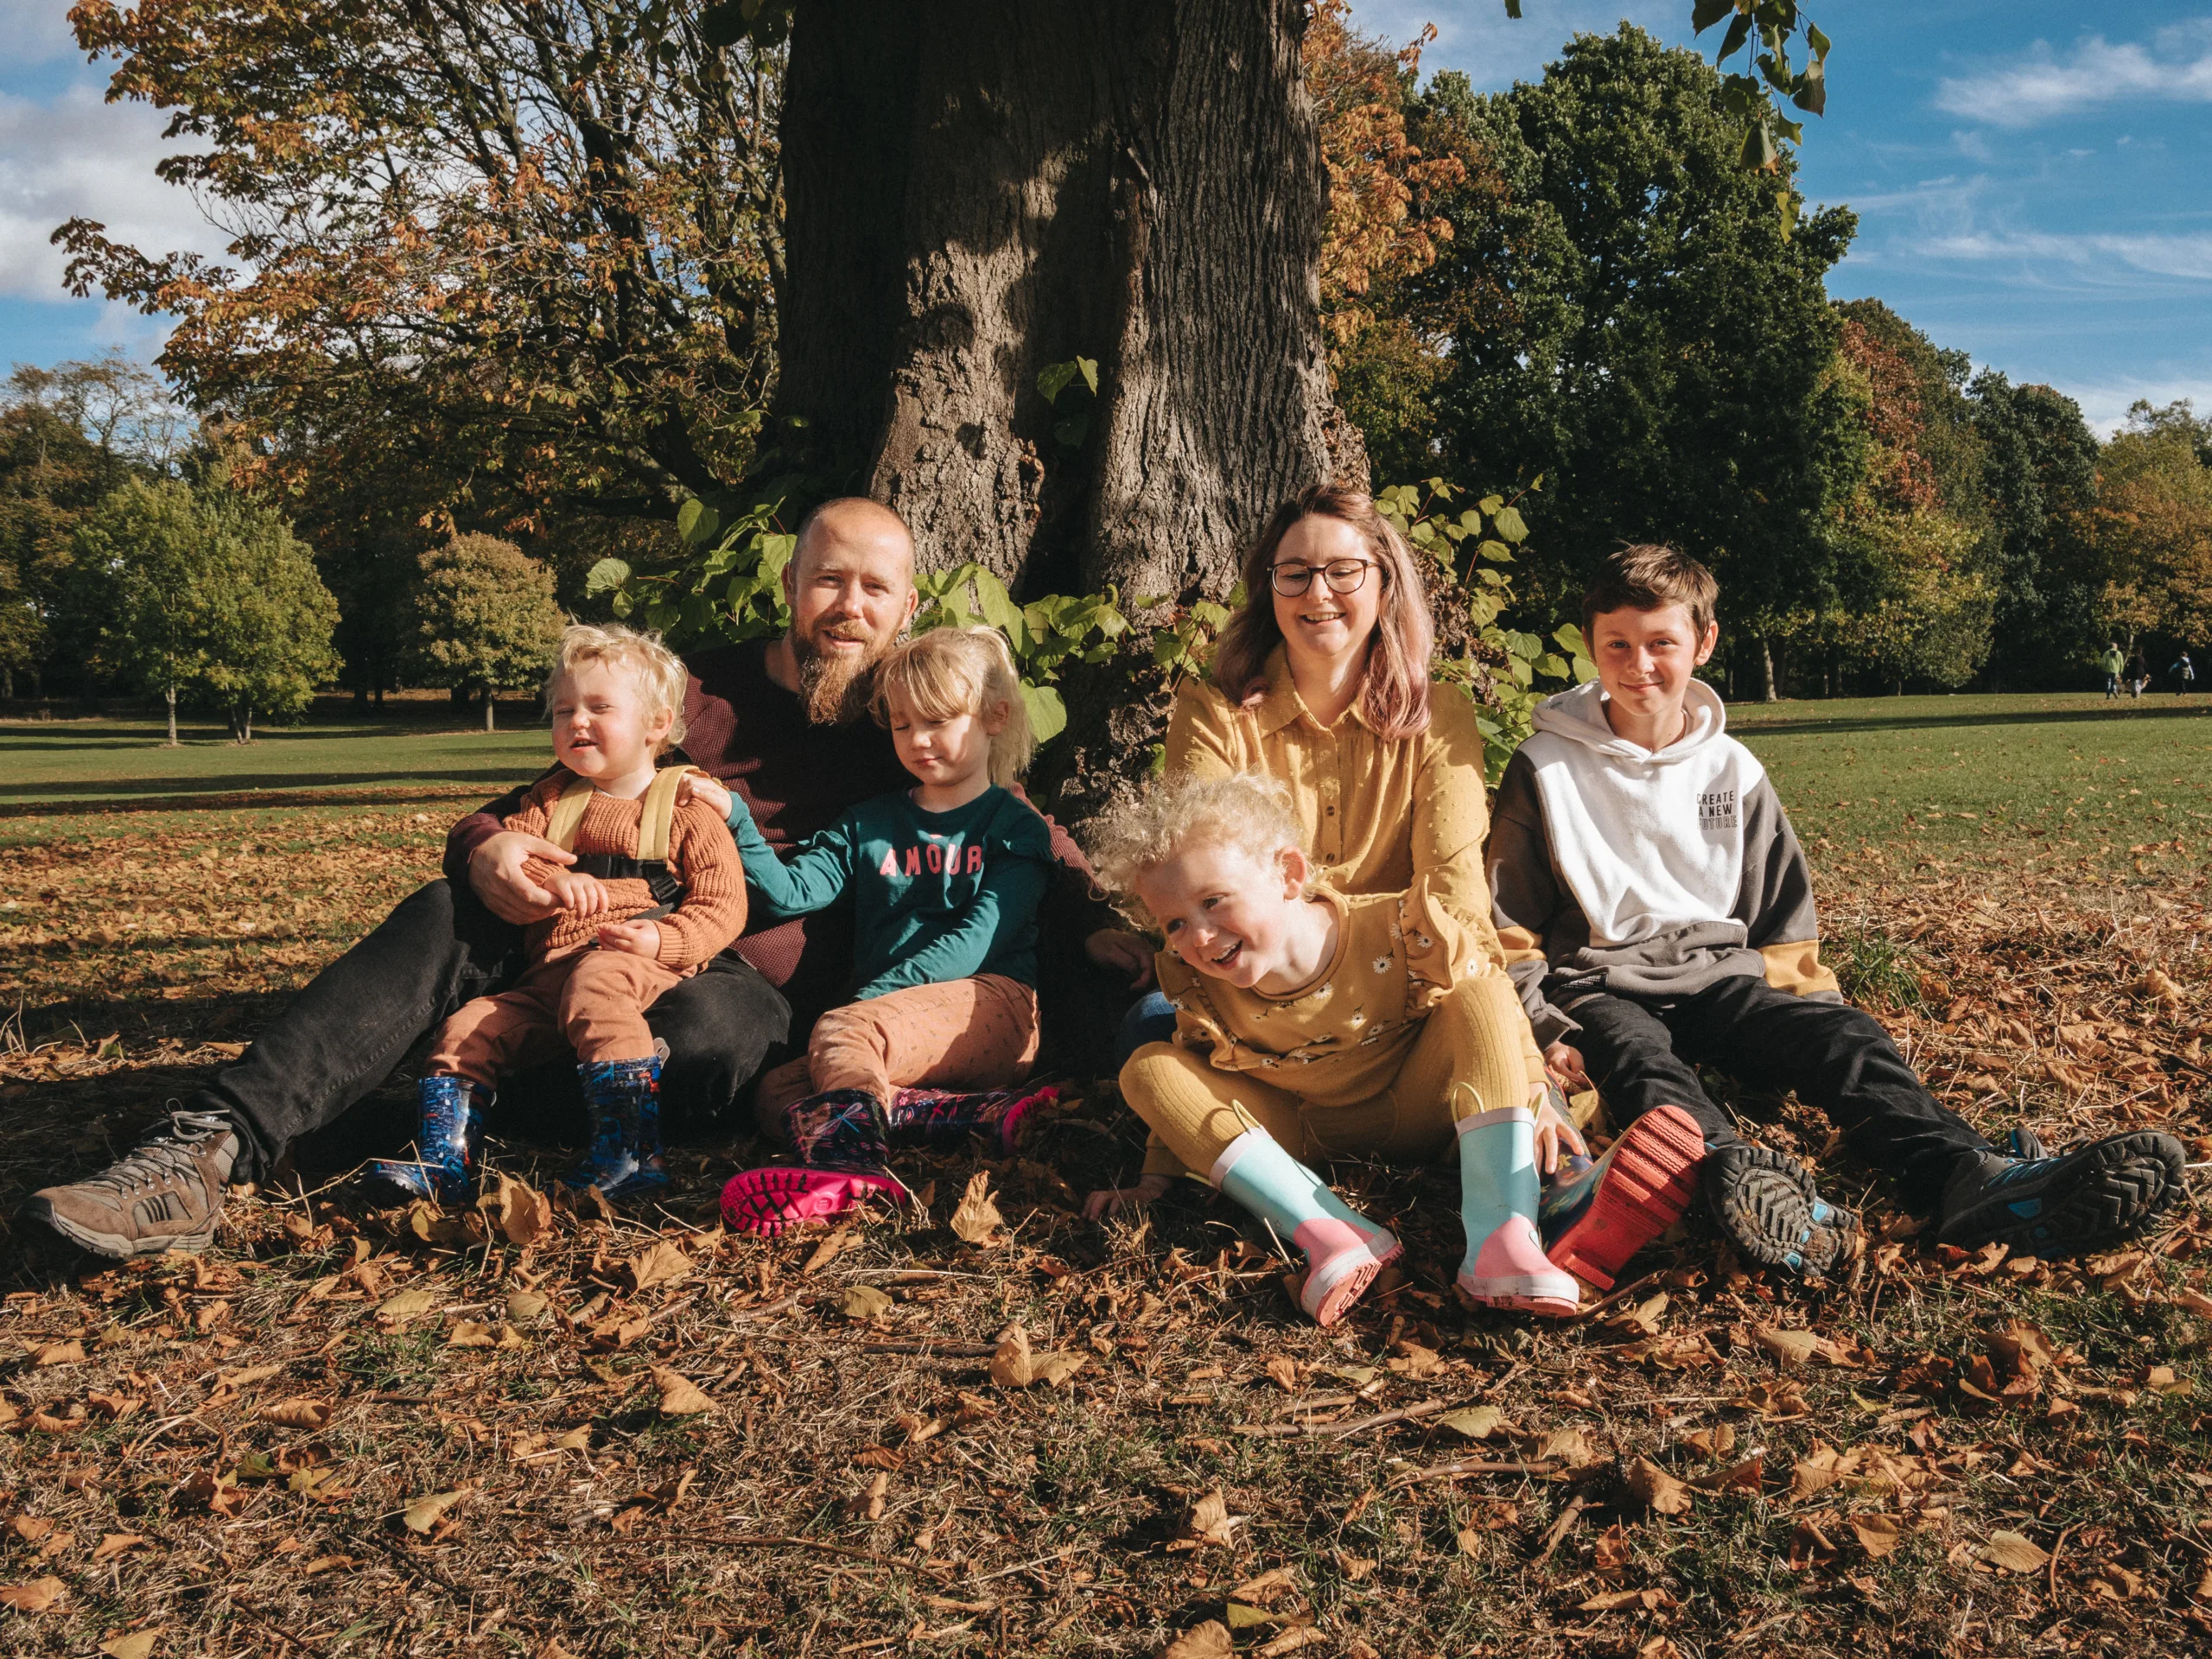 A family enjoys a picnic under a tree in a park in Lincolnshire.